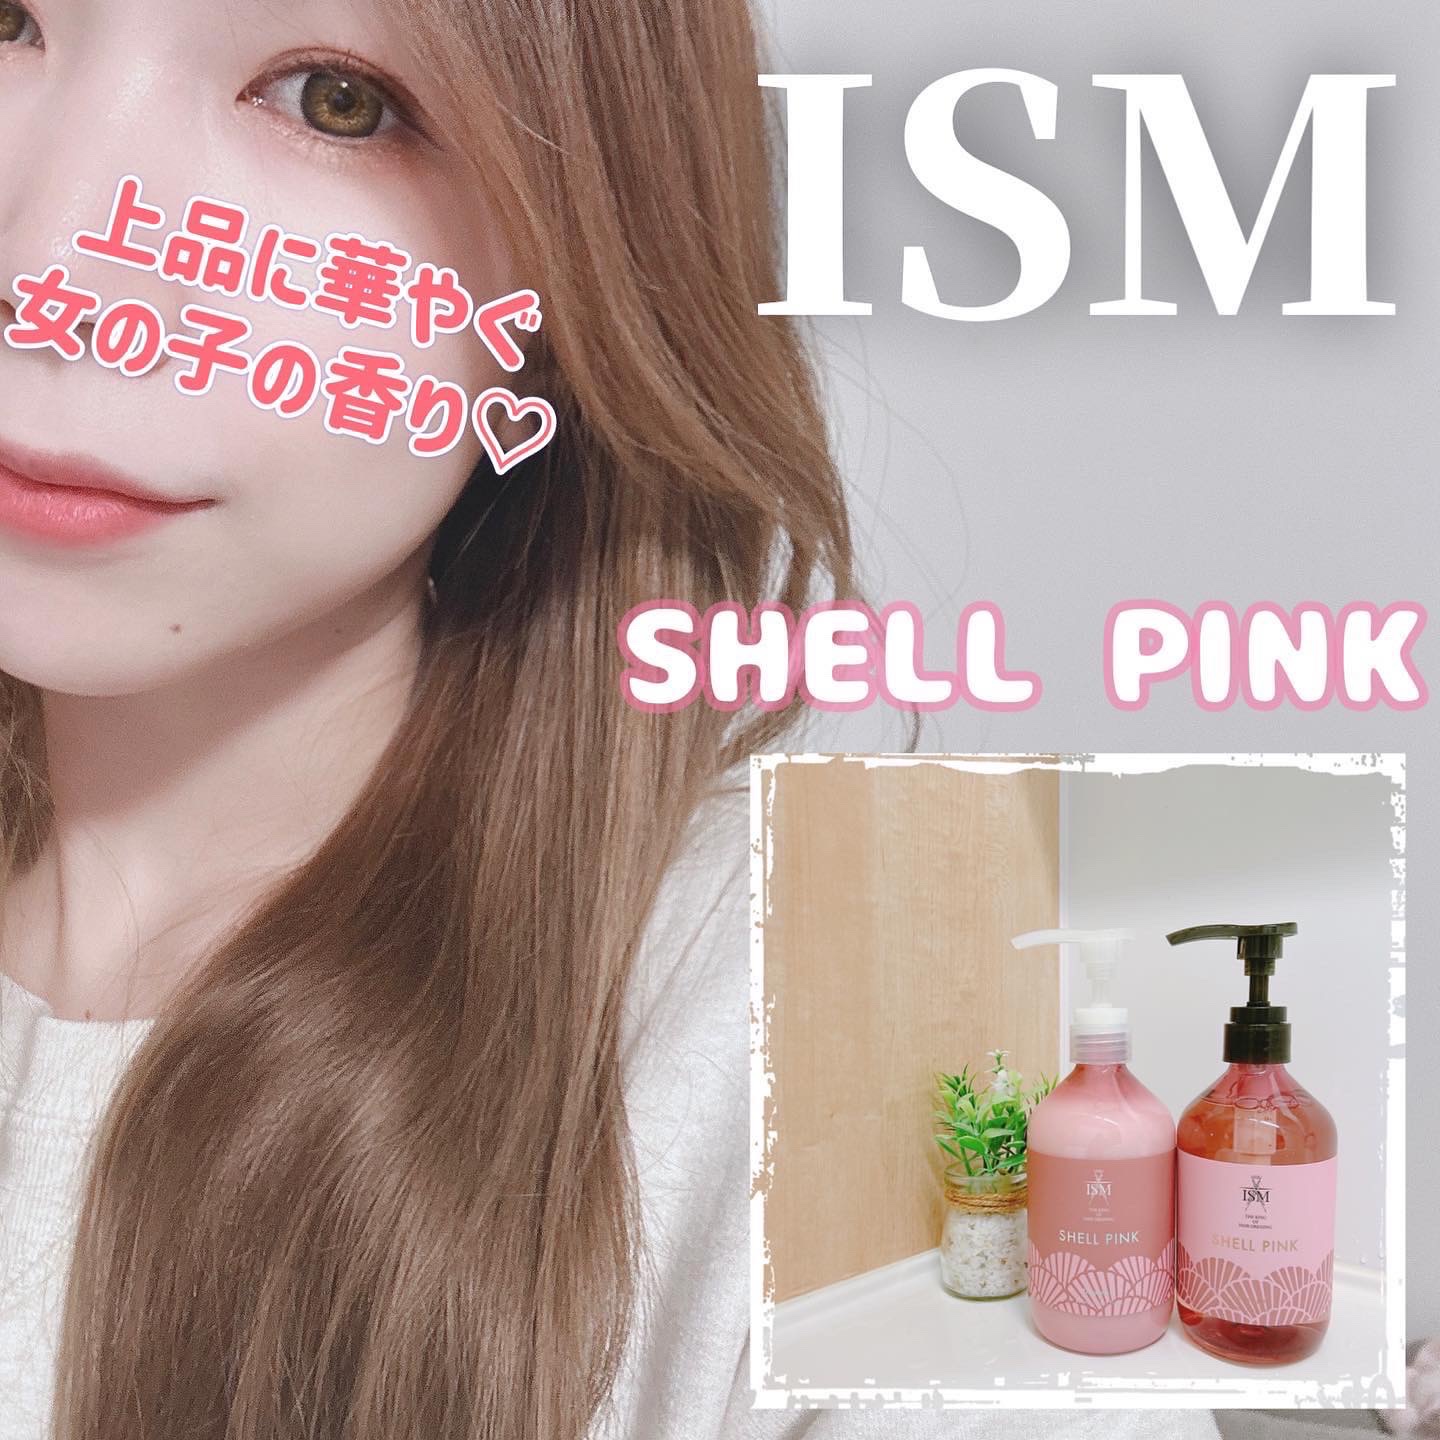 ISM SHELL PINK シャンプー トリートメント